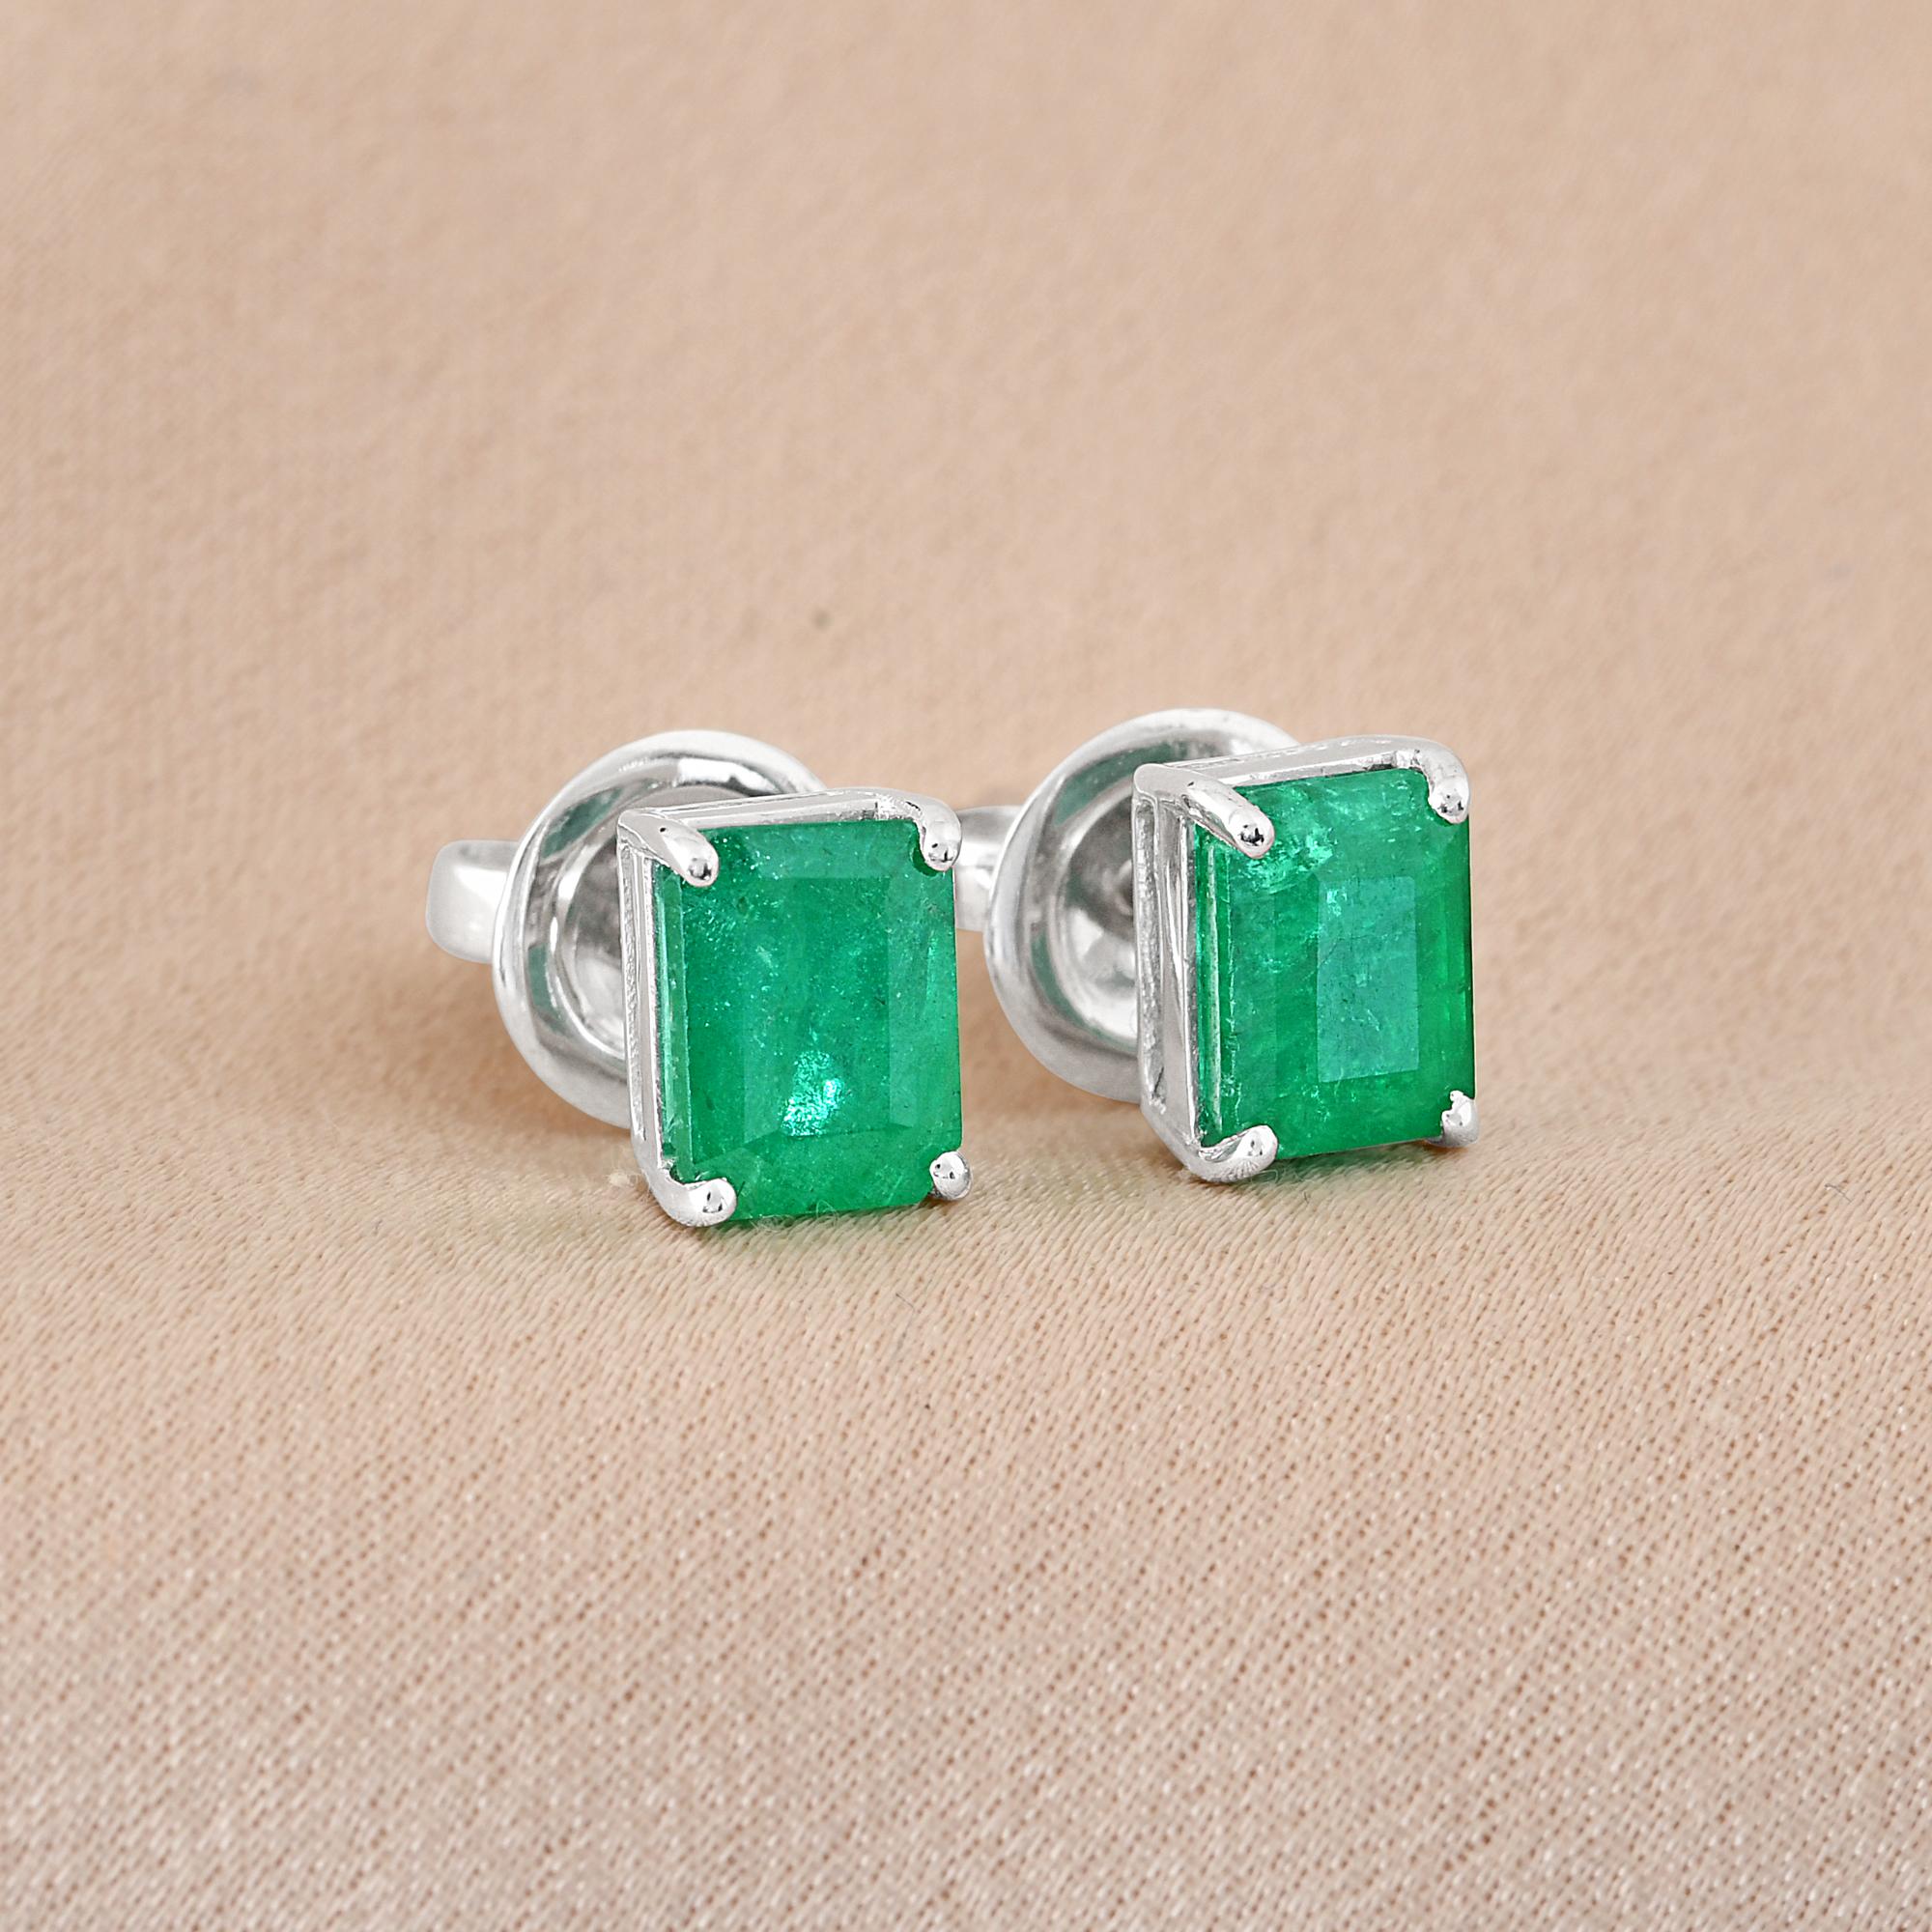 Item Code :- SEE-11833
Gross Weight :- 2.54 gm
18k White Gold Weight :- 2.15 gm
Emerald Weight :- 1.95 carat
Earrings Length :- 8 mm approx.
✦ Sizing
.....................
We can adjust most items to fit your sizing preferences. Most items can be